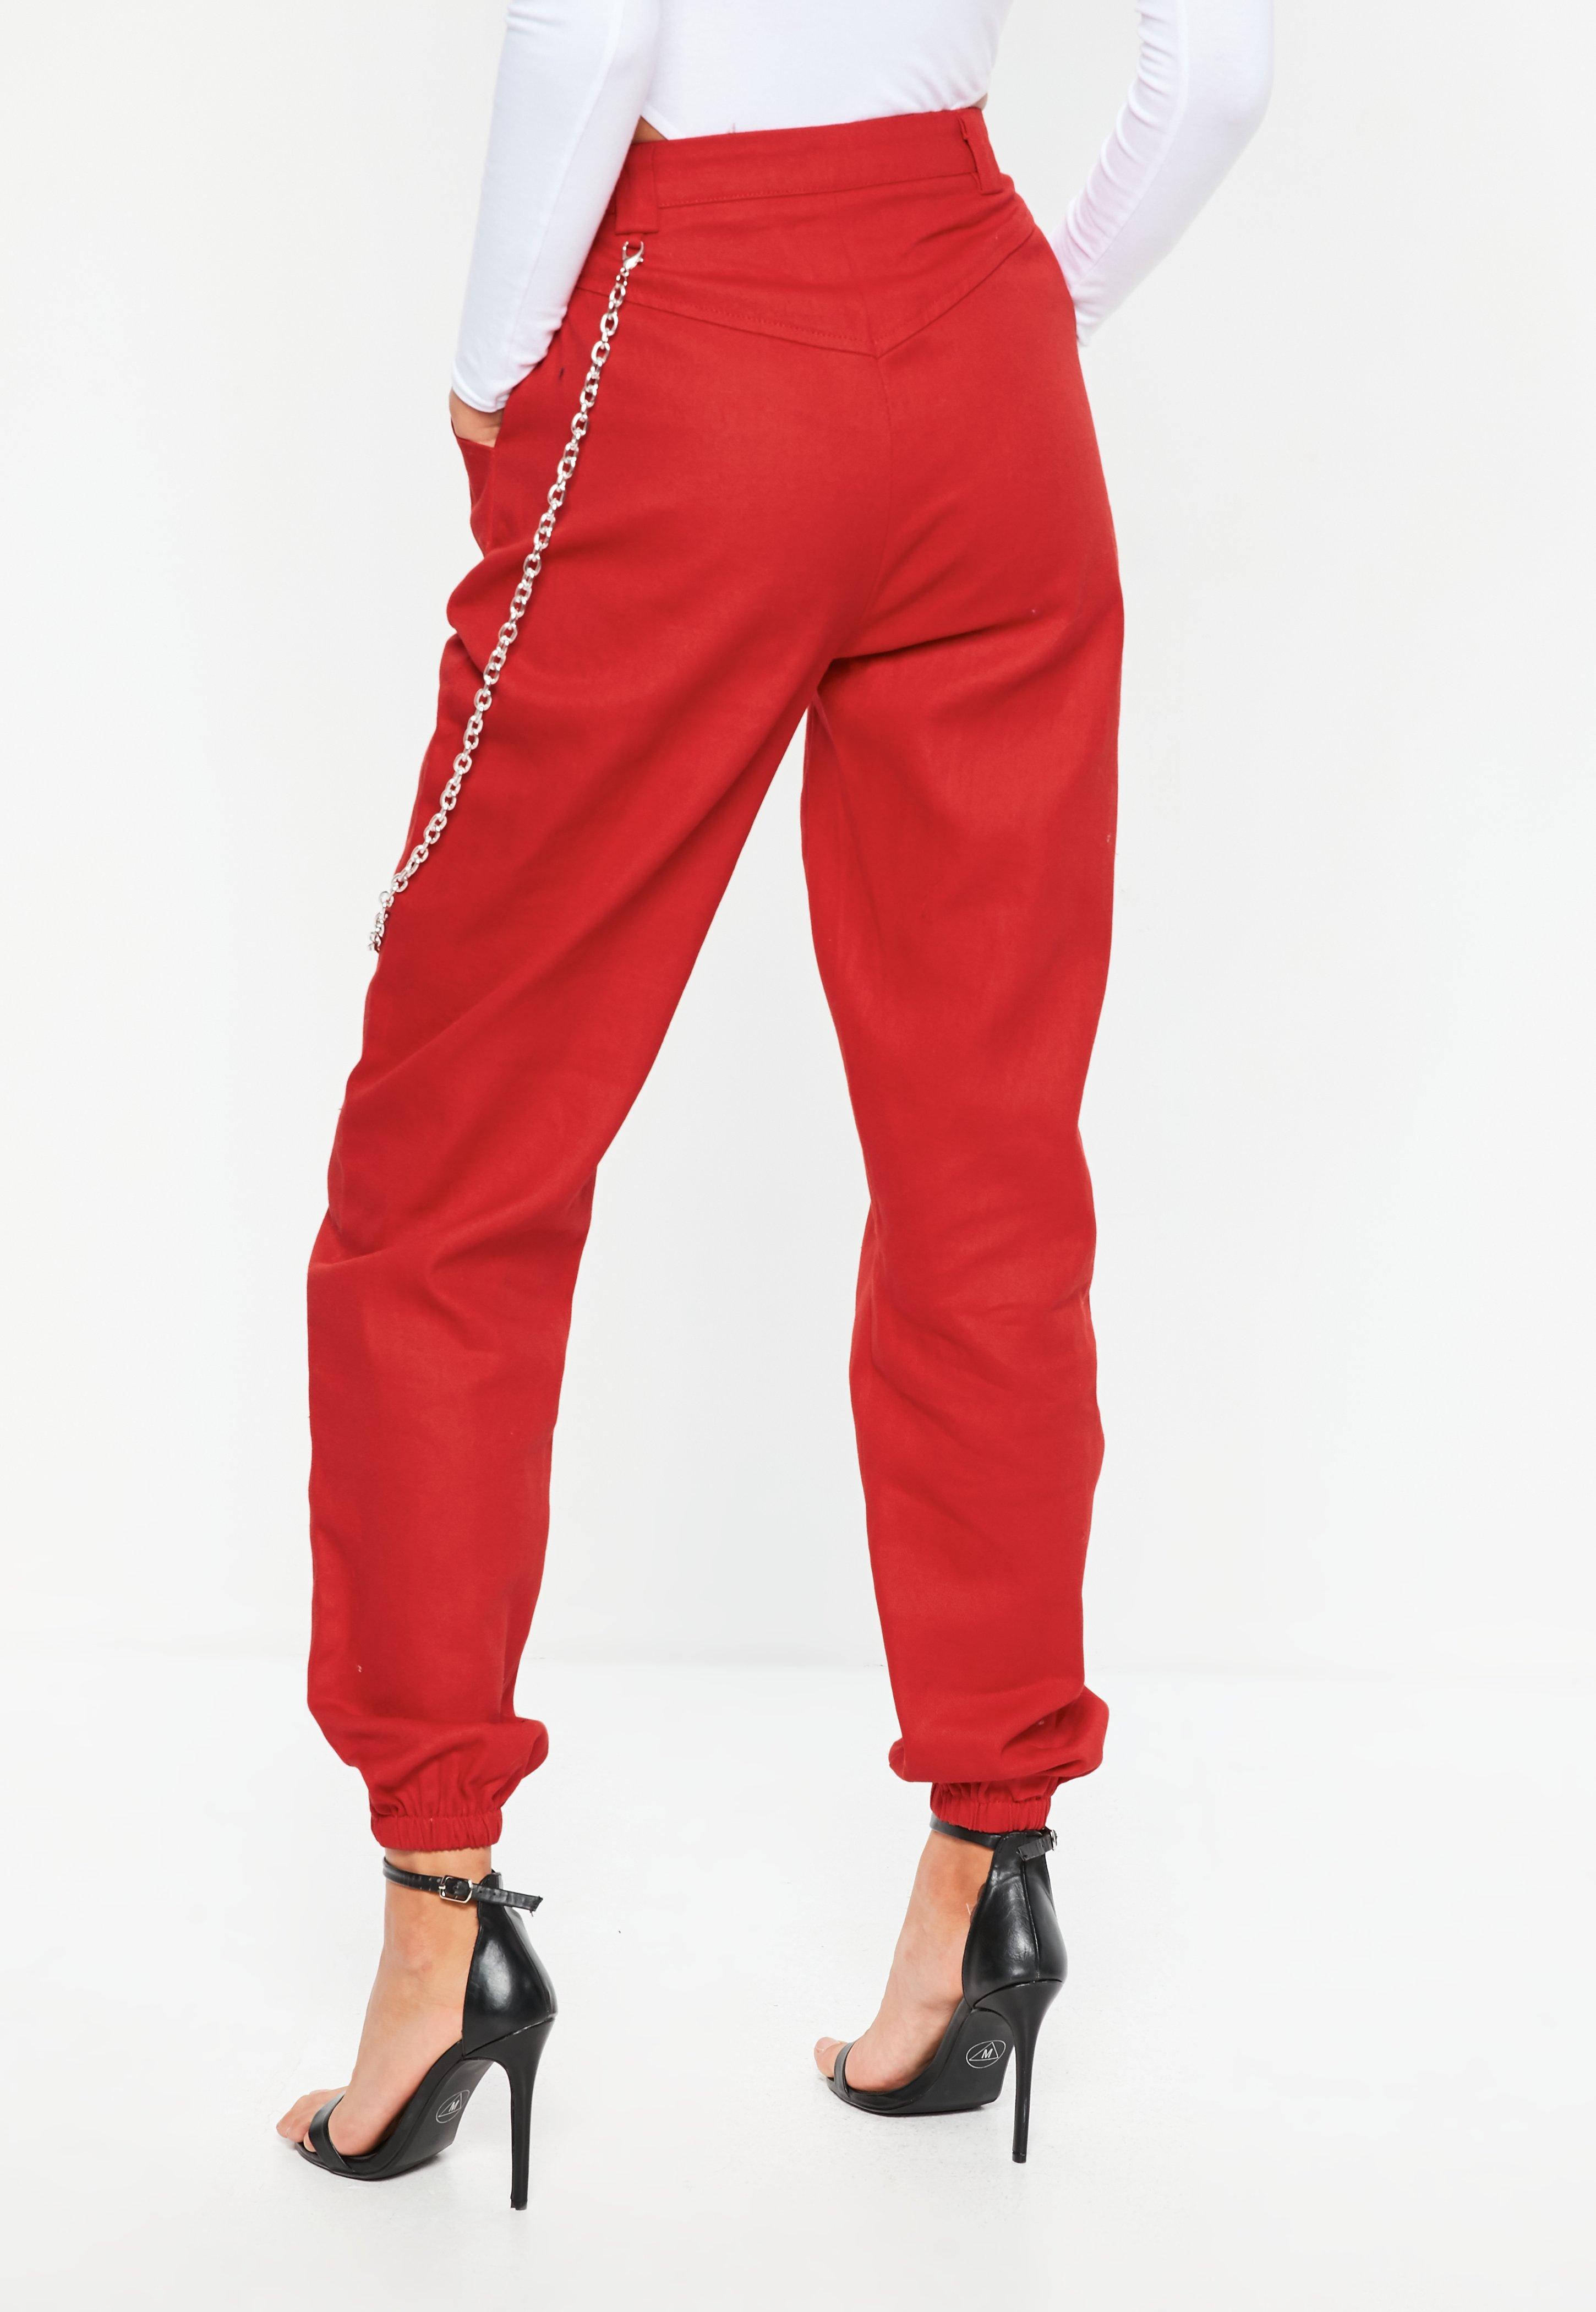 red cargo pants with chain